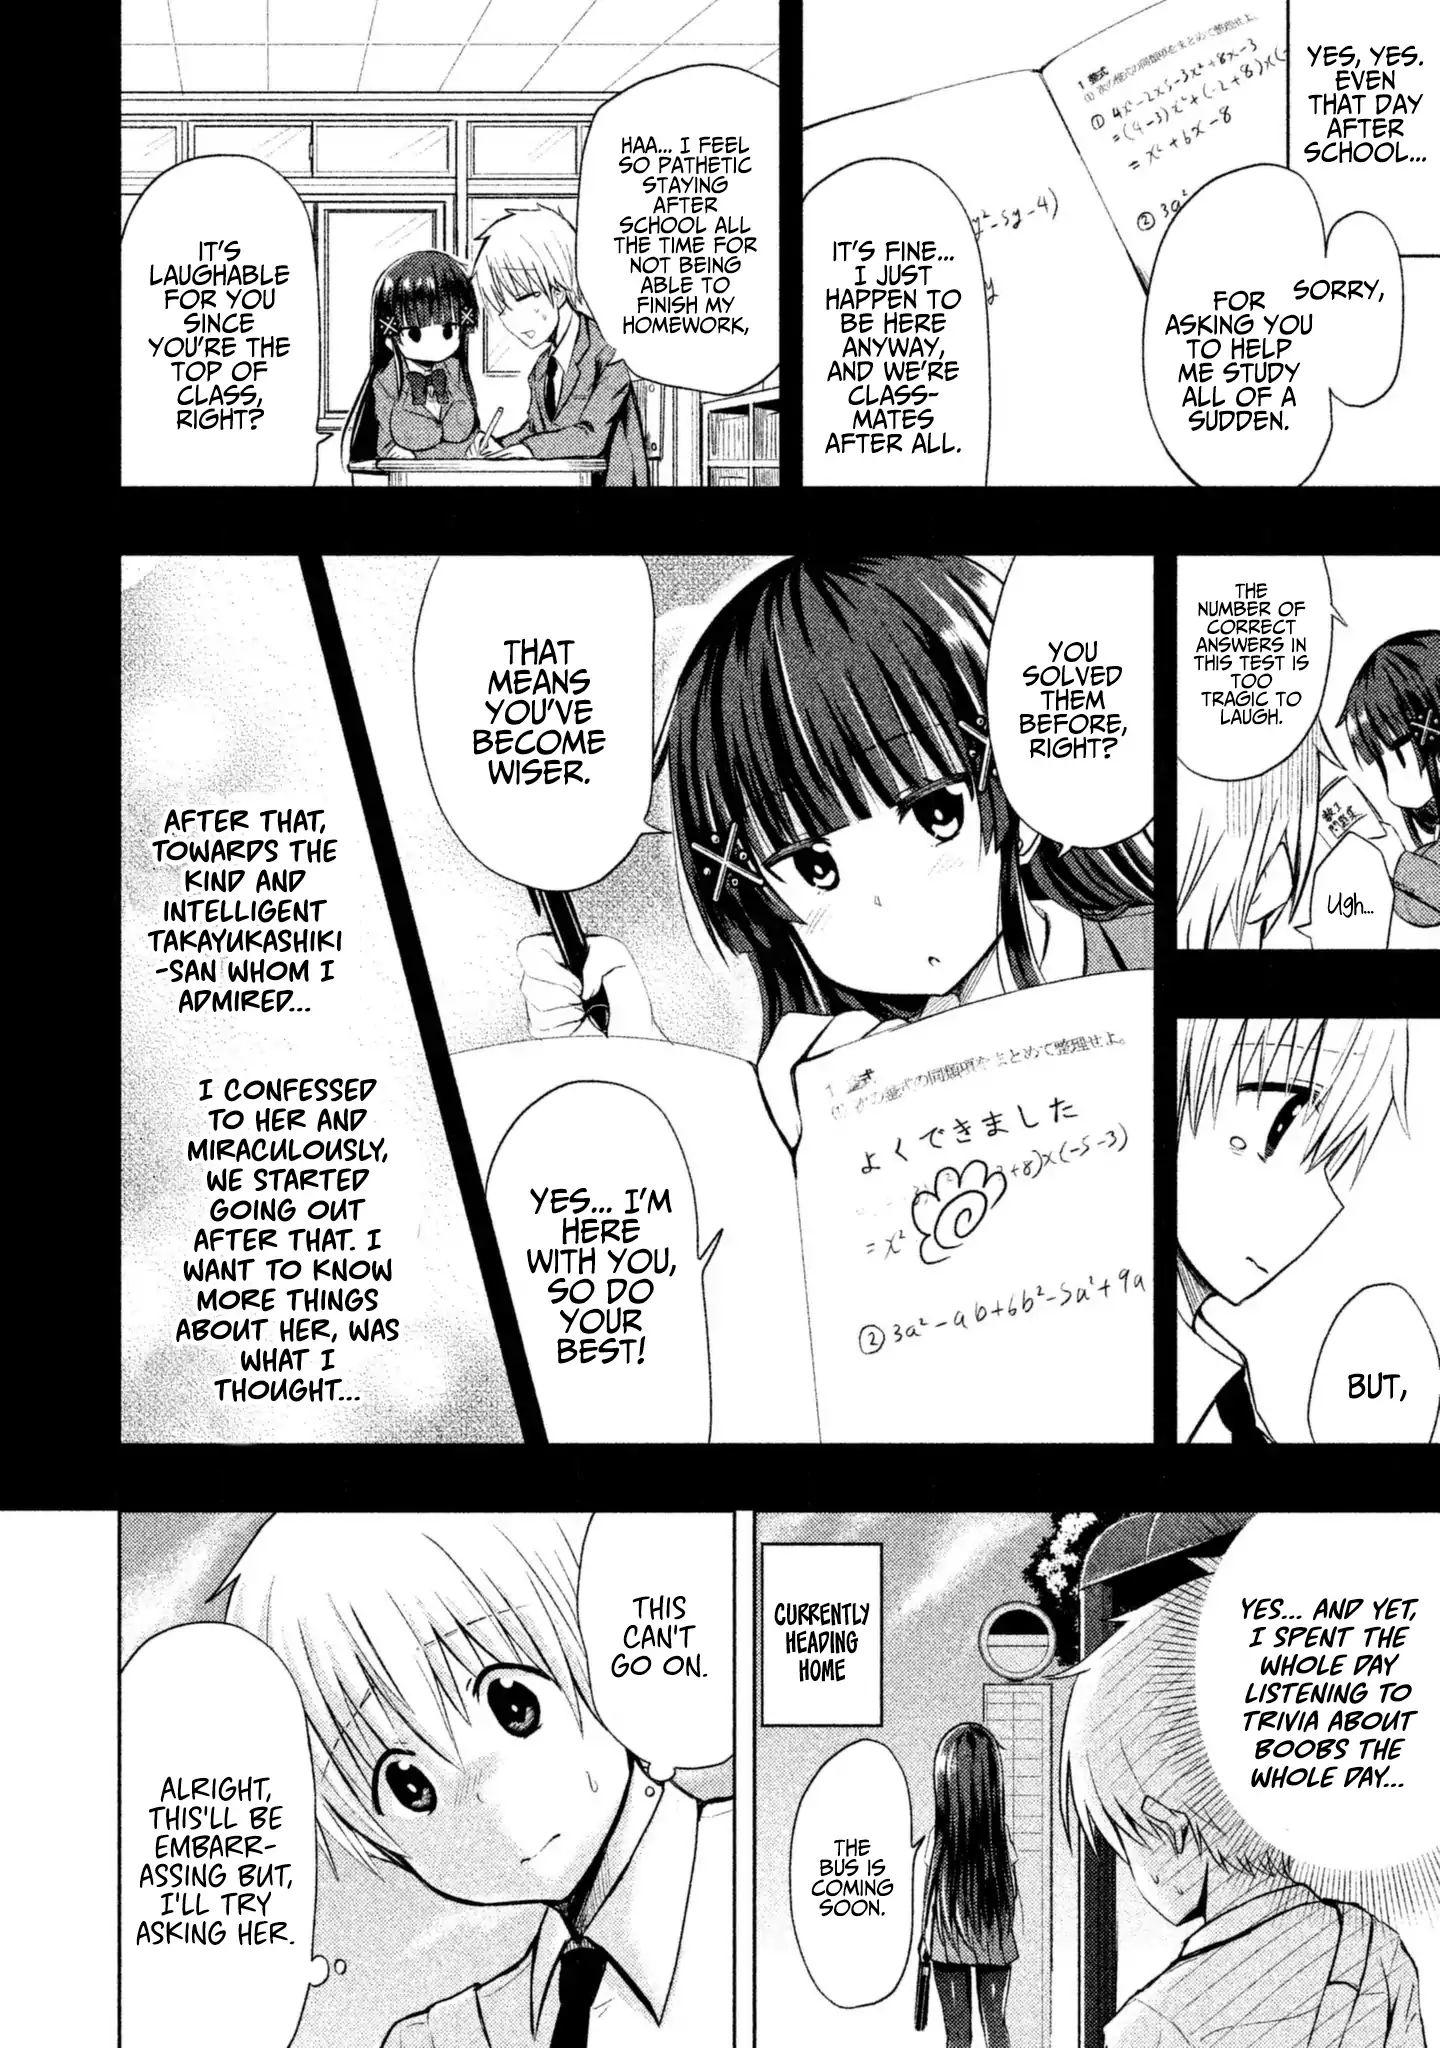 A Girl Who Is Very Well-Informed About Weird Knowledge, Takayukashiki Souko-San Vol.1 Chapter 1: Chest page 11 - Mangakakalots.com